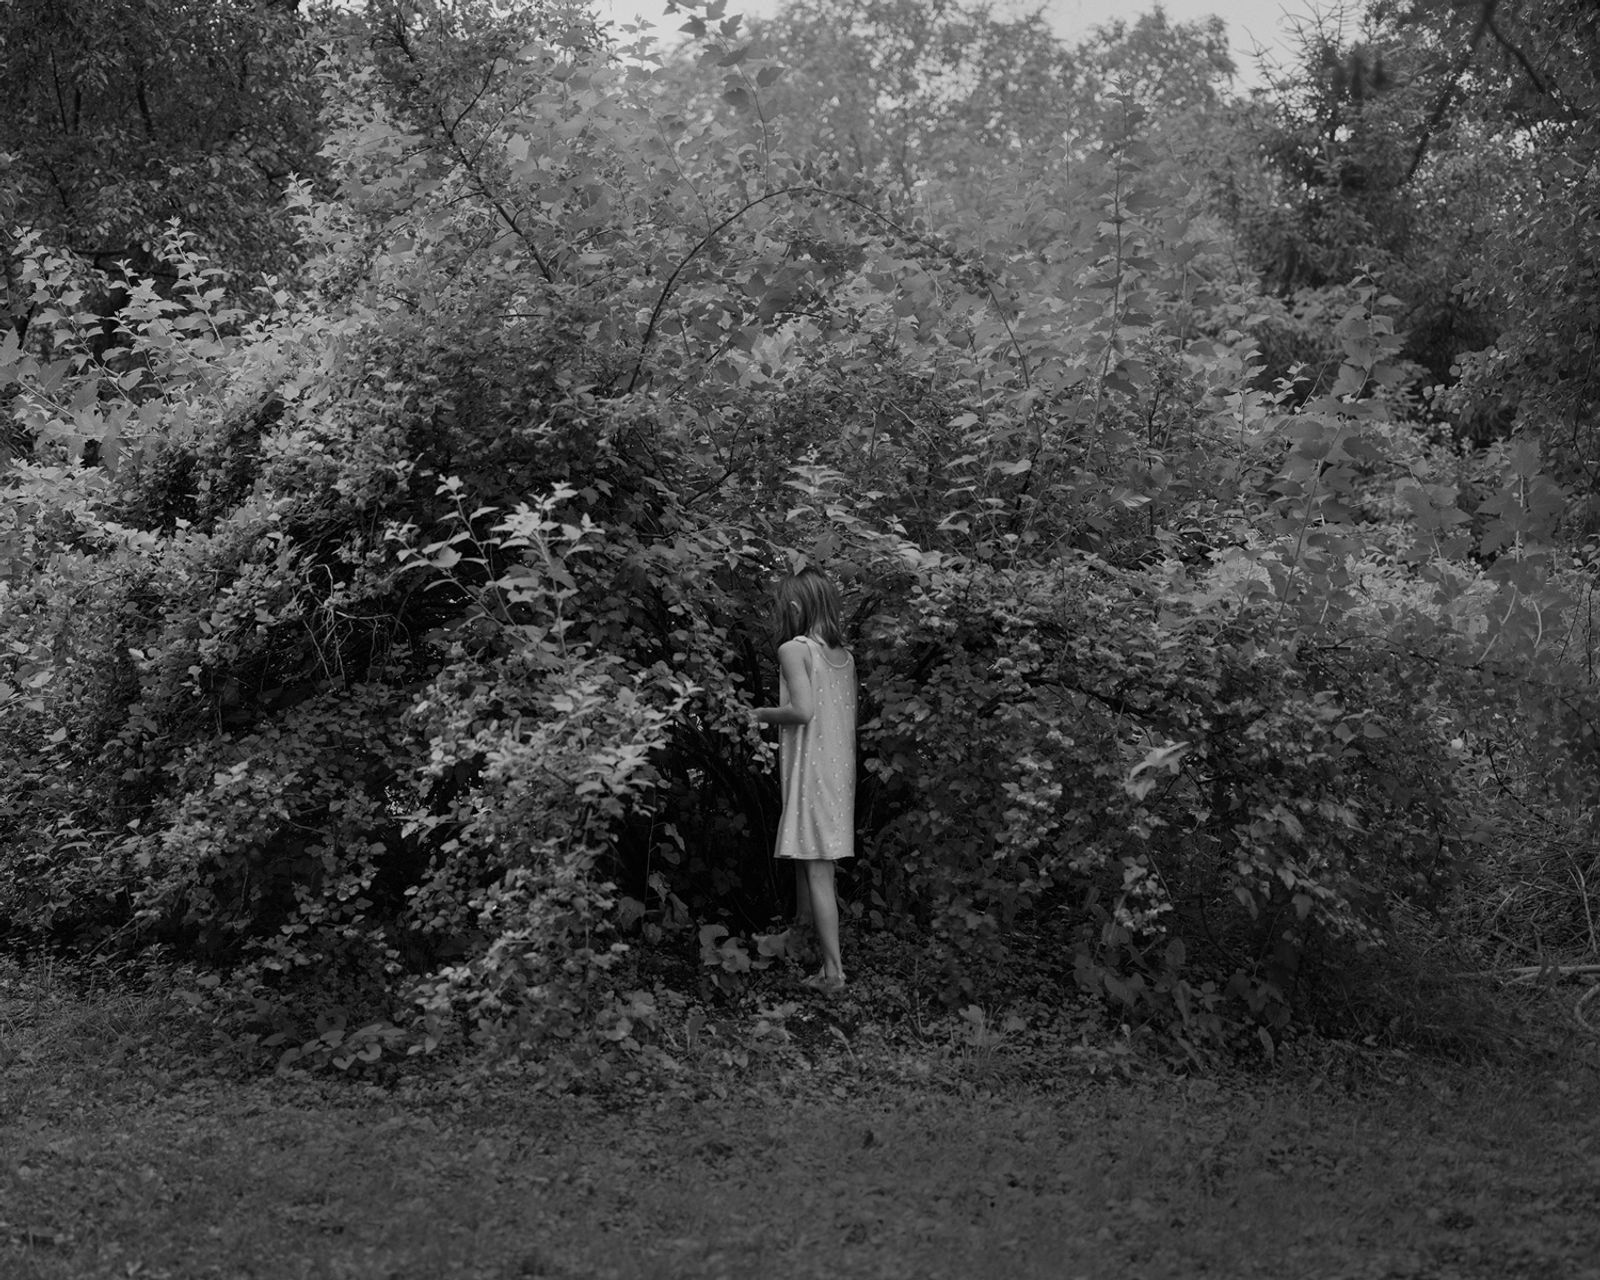 © Erinn Springer - Image from the Home Is Where The Garden Grows photography project